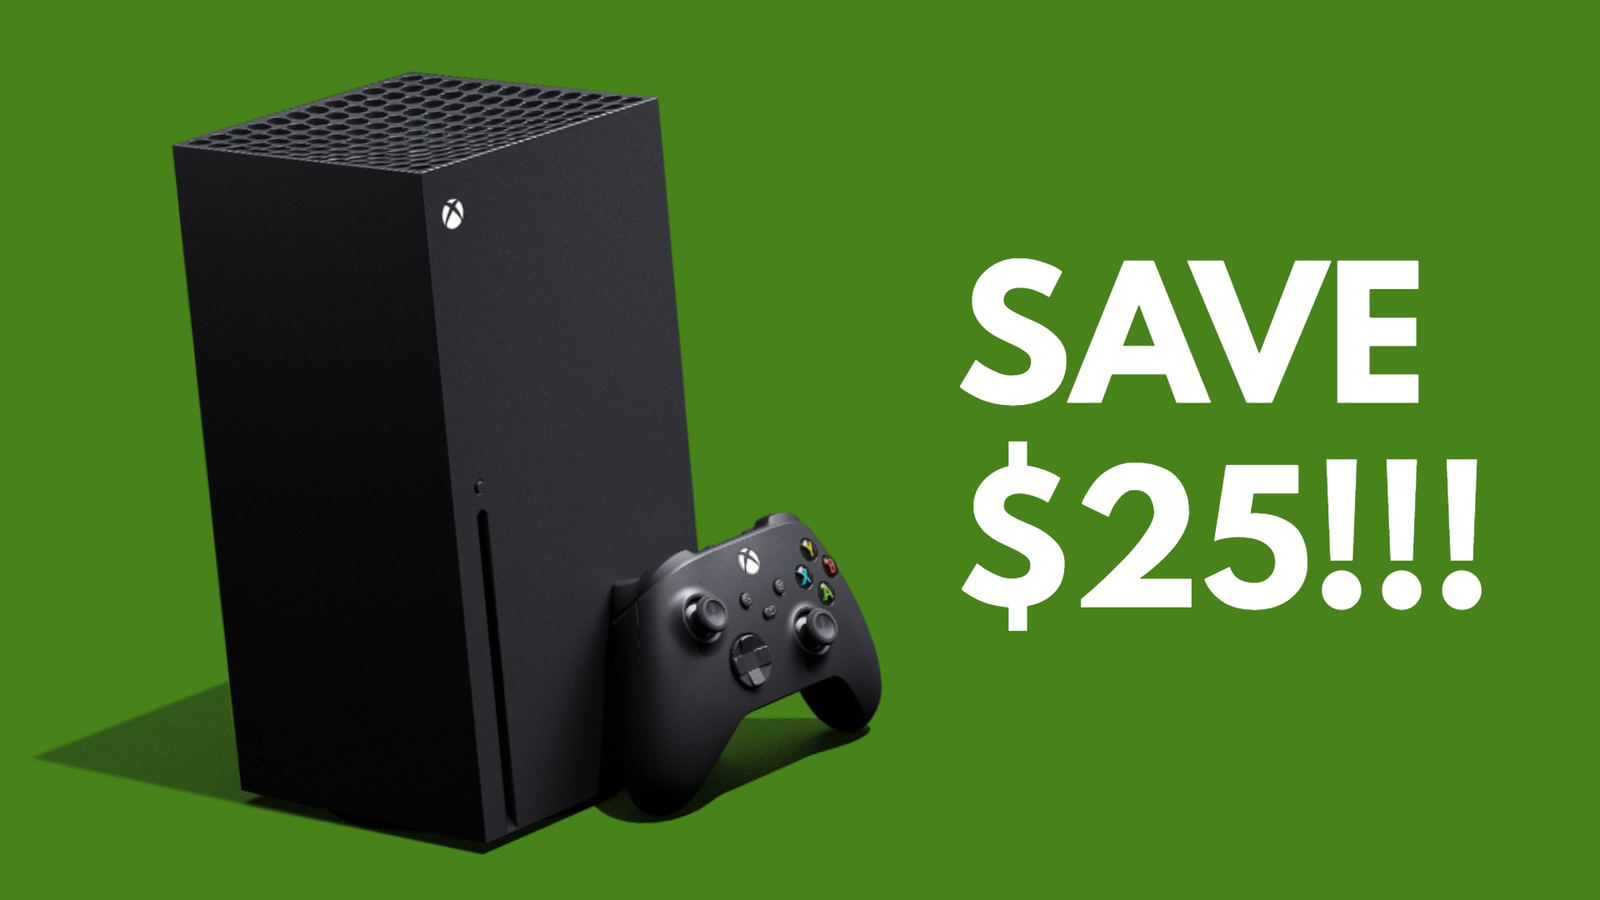 Xbox Black Friday deal: Save $50 on the Xbox Series X console and get a $50   credit